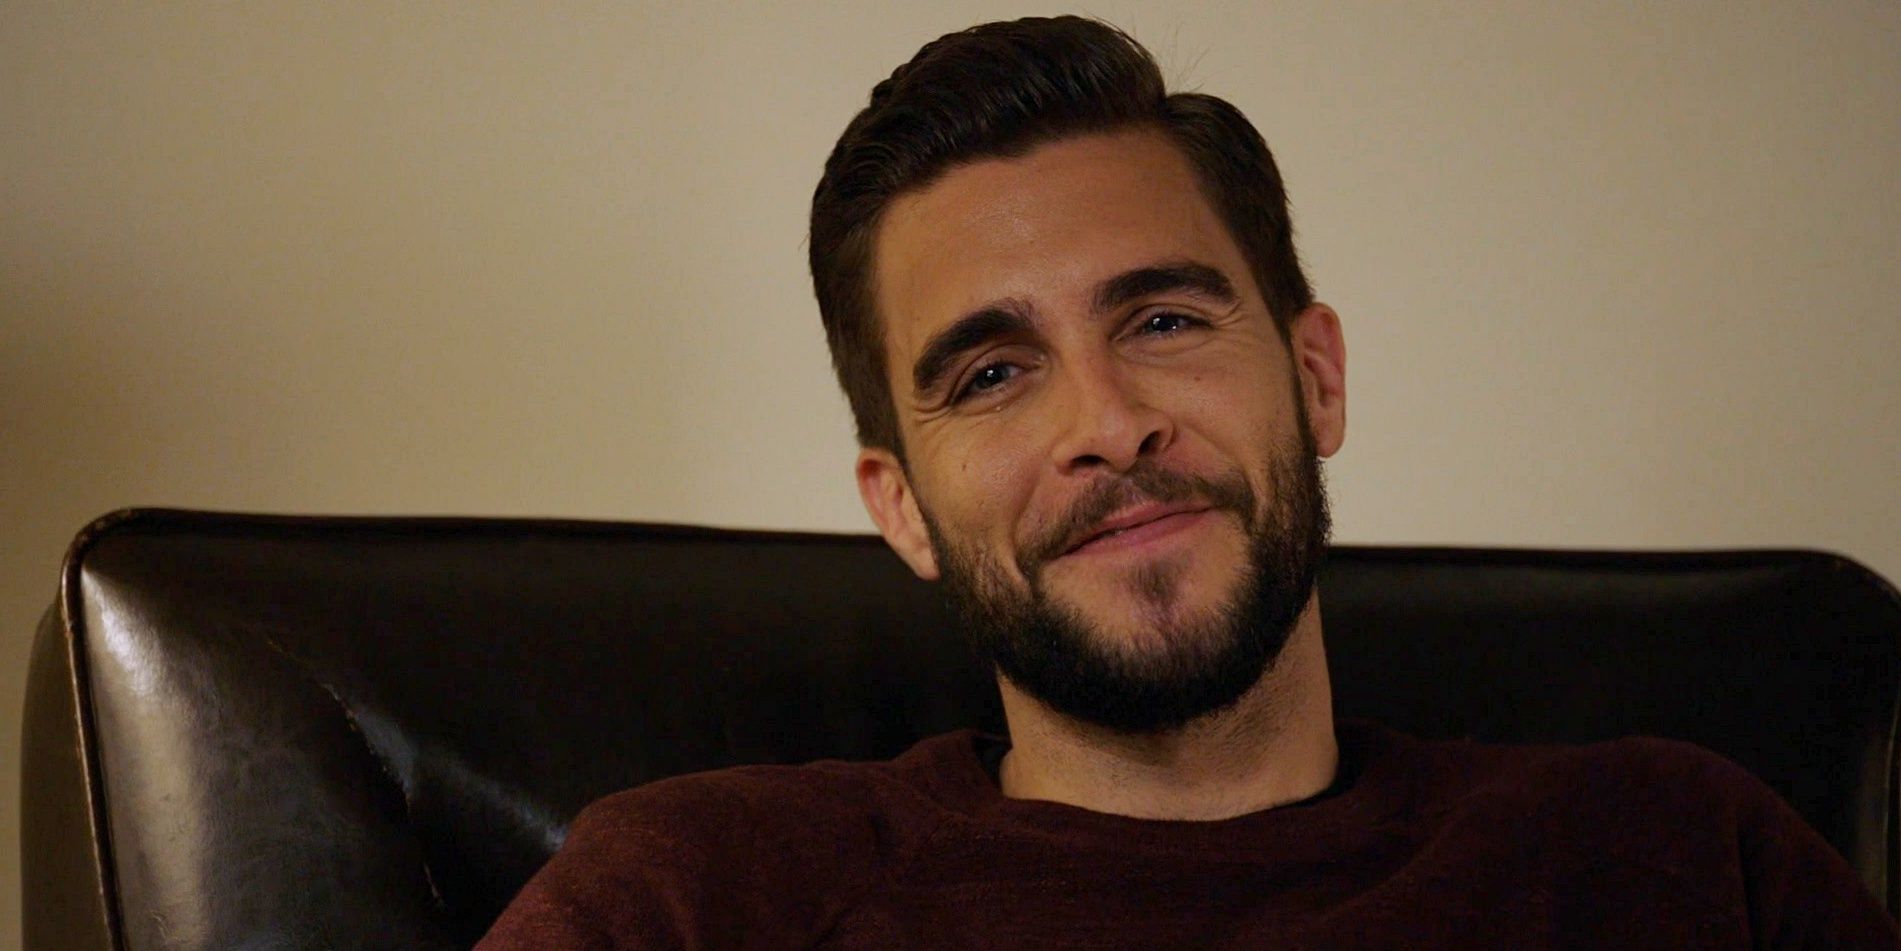 Justin Voight, played by Josh Segarra, wears a maroon sweater in the season 3 finale of Chicago PD.